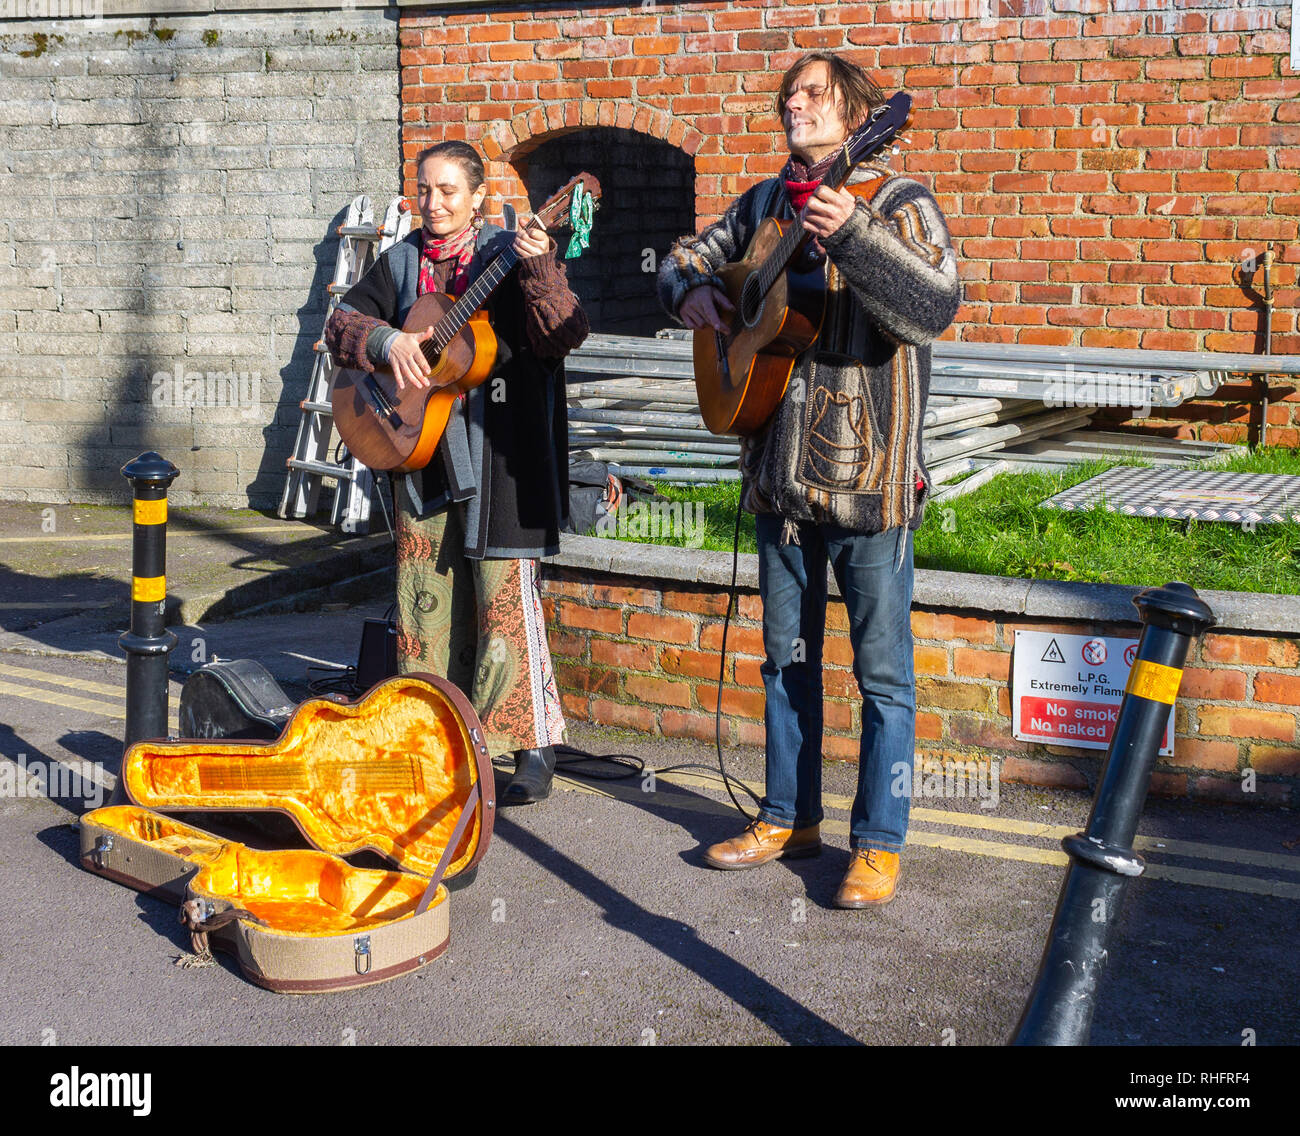 male guitarist and female guitarist or buskers performing on a public street Stock Photo